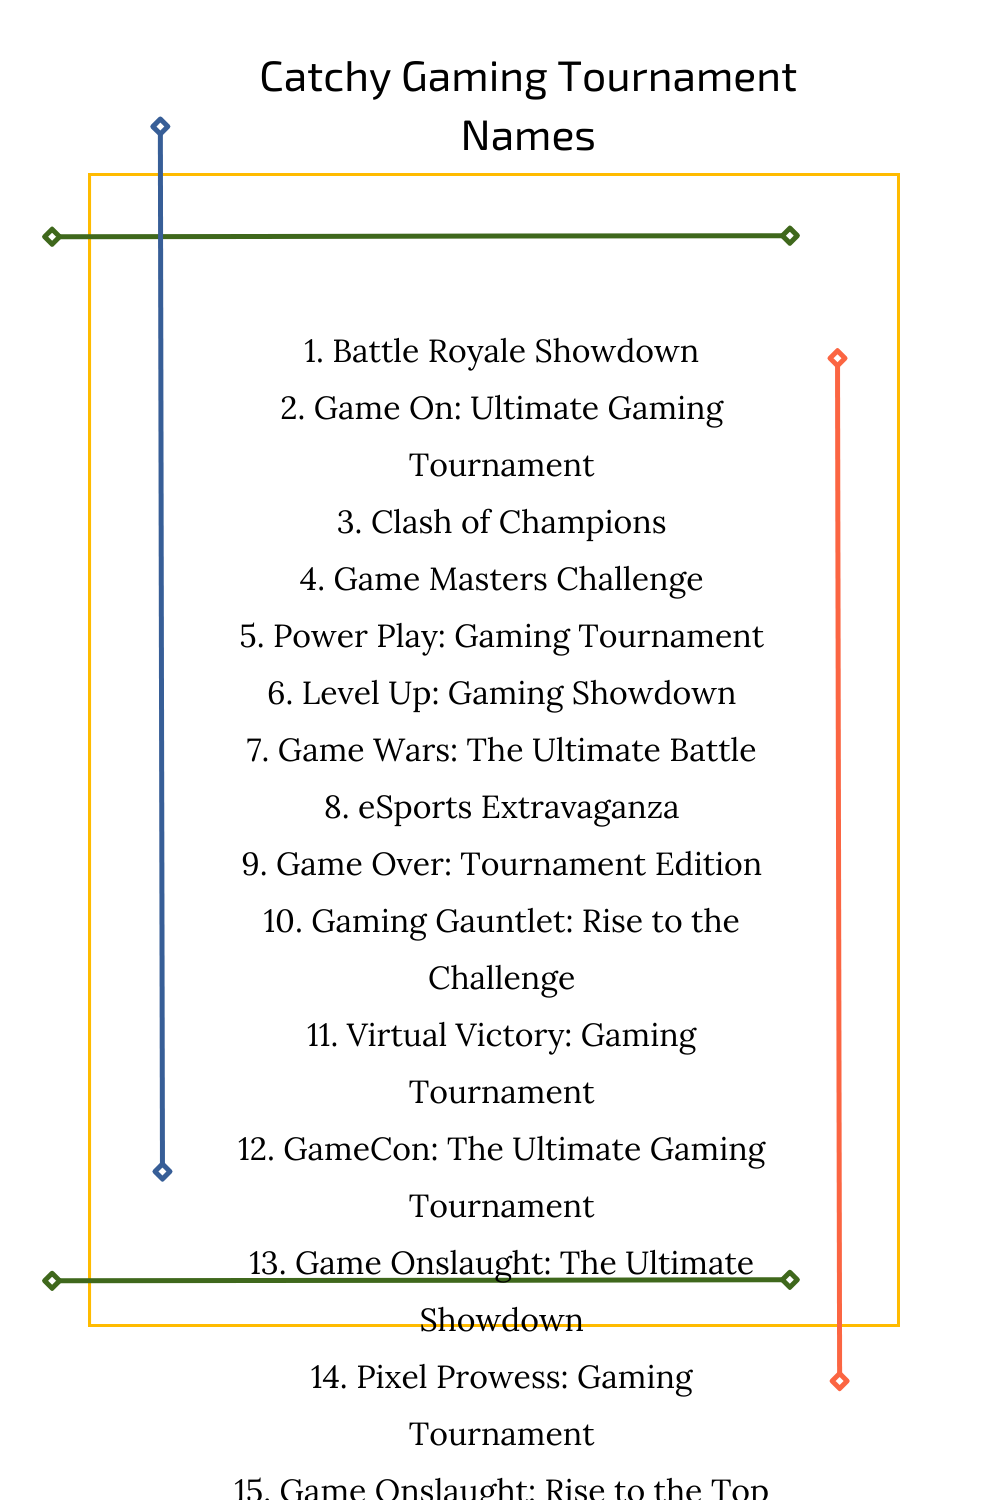 Catchy Gaming Tournament Names